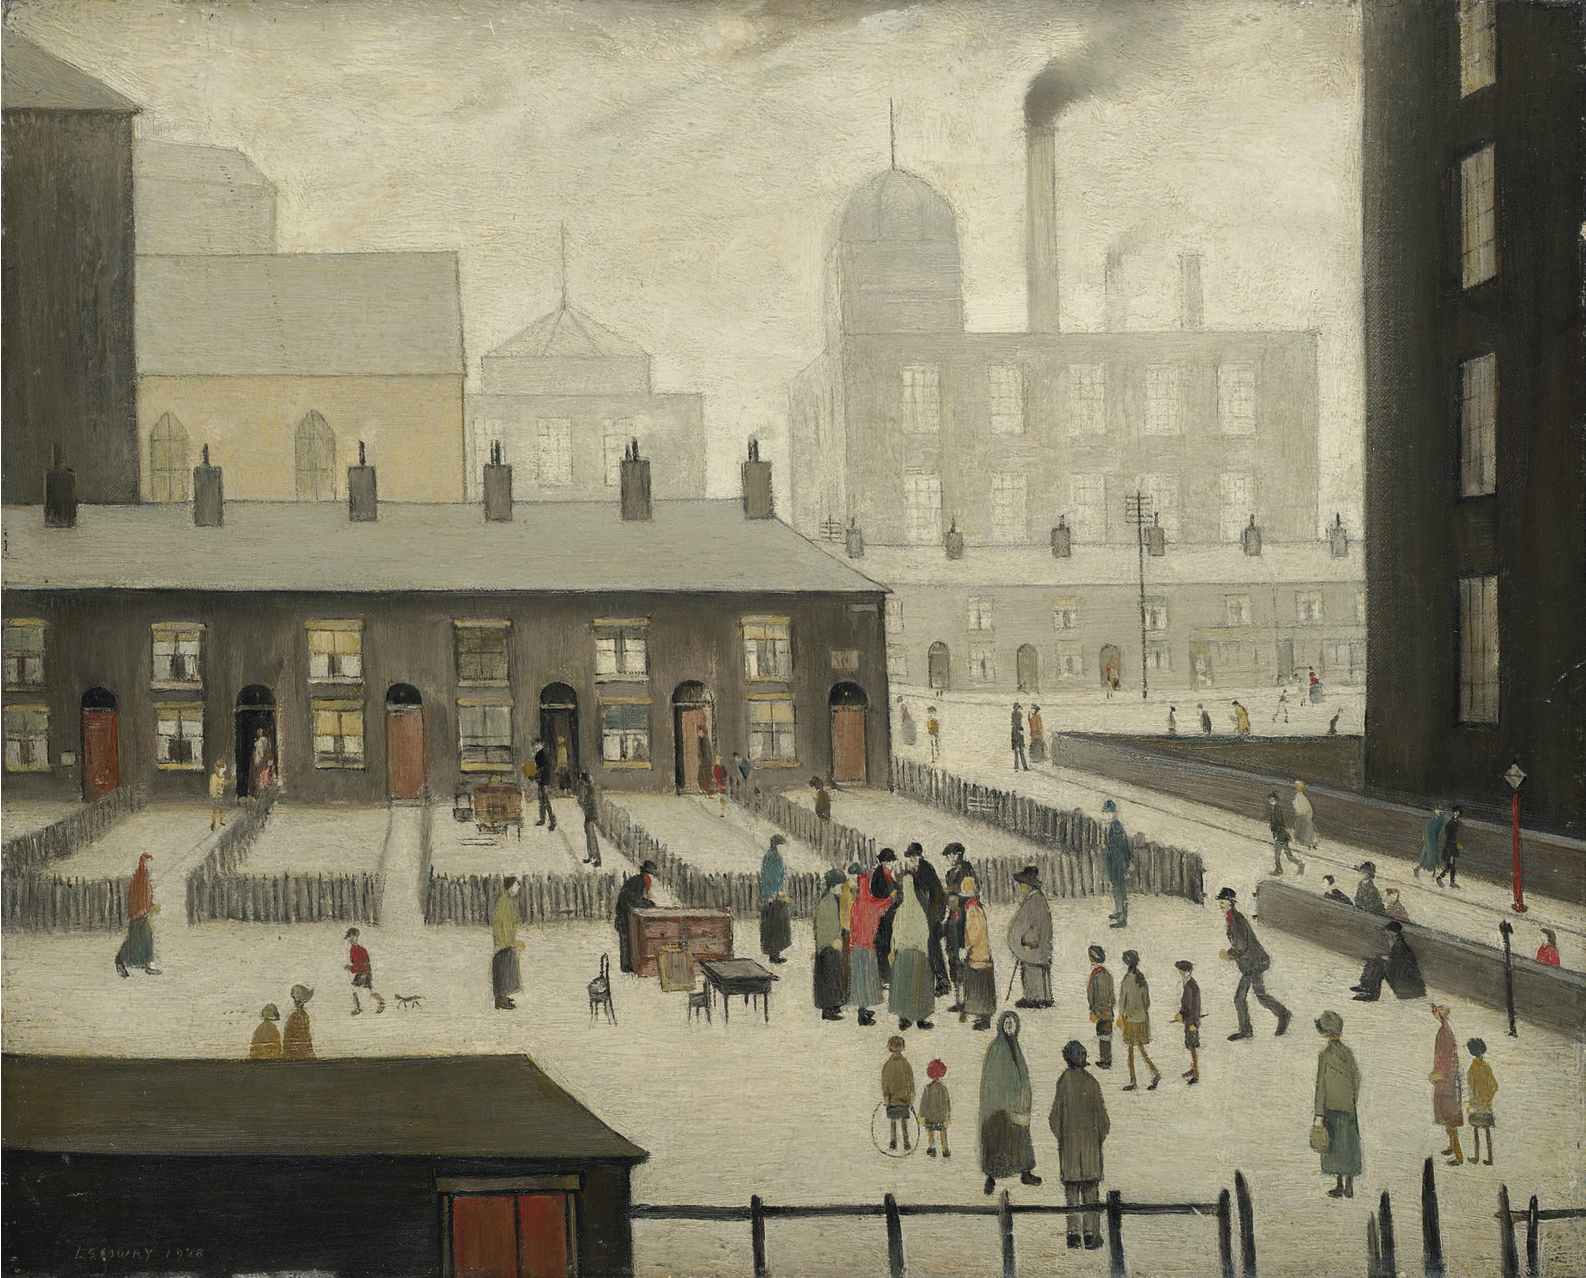 A Removal (1928) by Laurence Stephen Lowry (1887 - 1976), English artist.